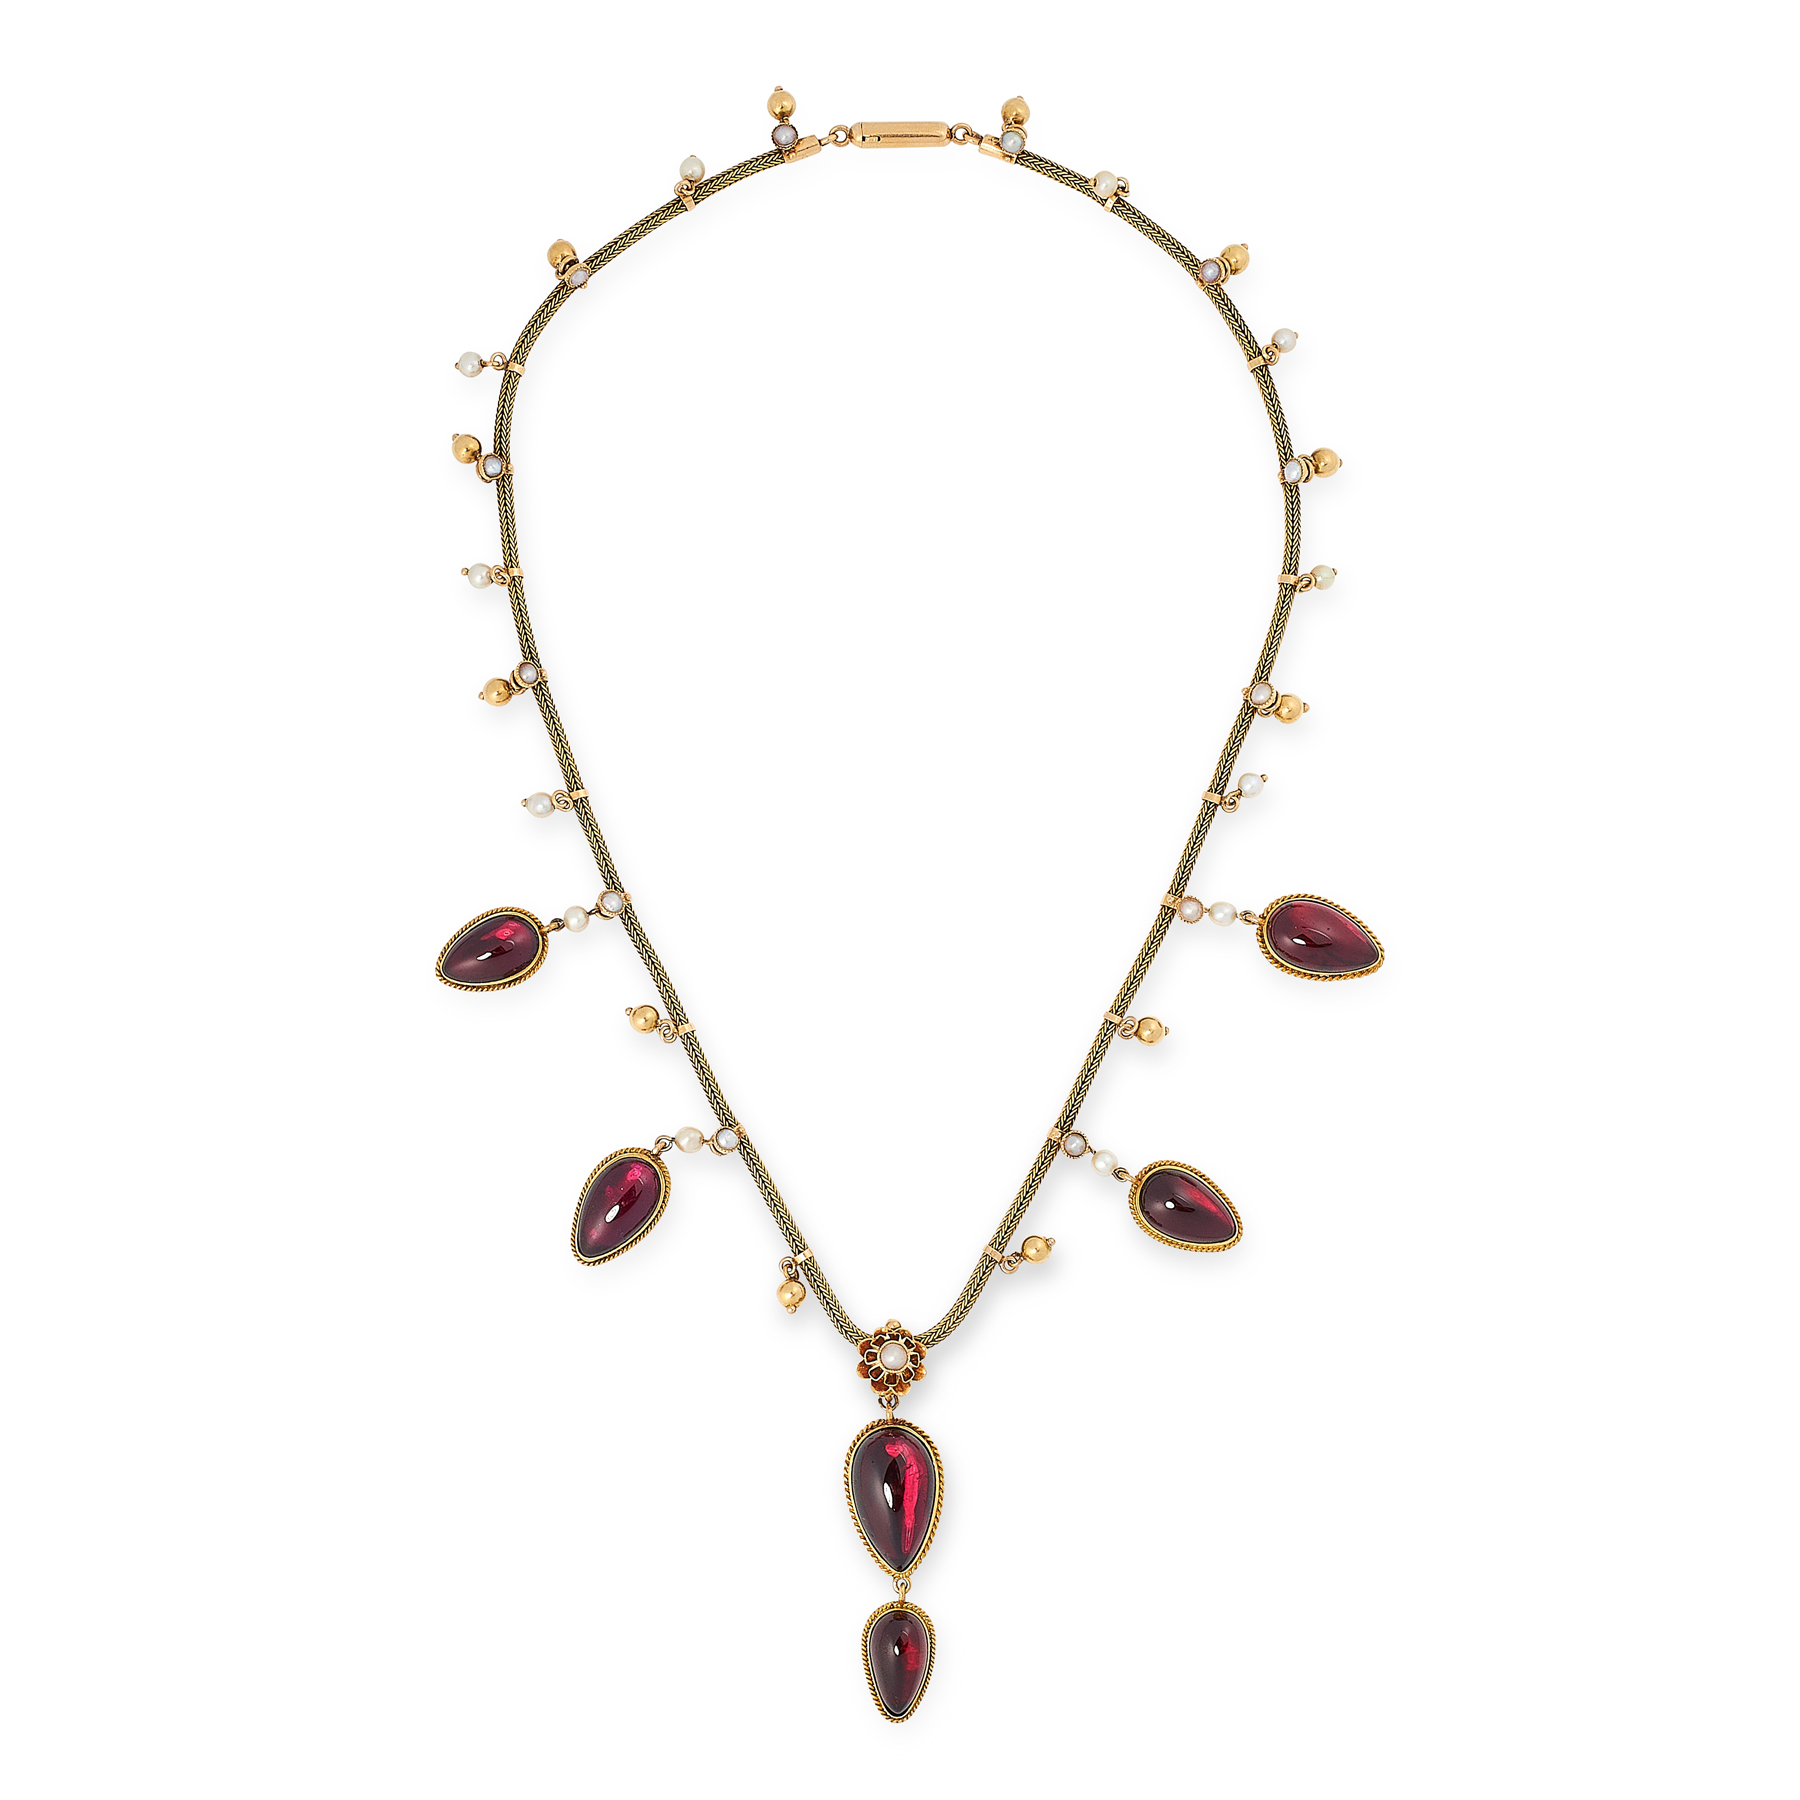 ANTIQUE GARNET AND PEARL DROP NECKLACE - Image 3 of 7